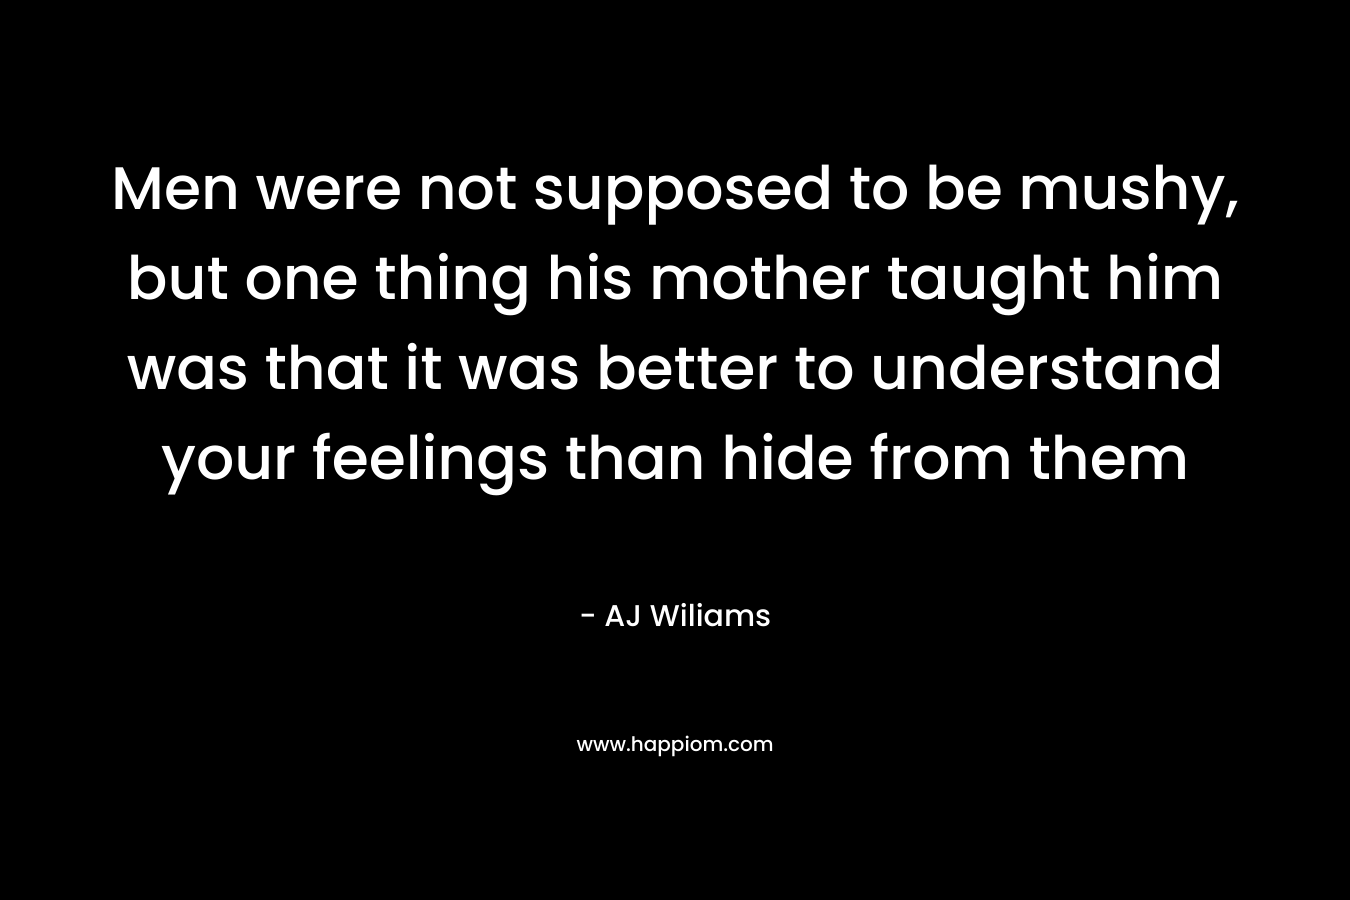 Men were not supposed to be mushy, but one thing his mother taught him was that it was better to understand your feelings than hide from them